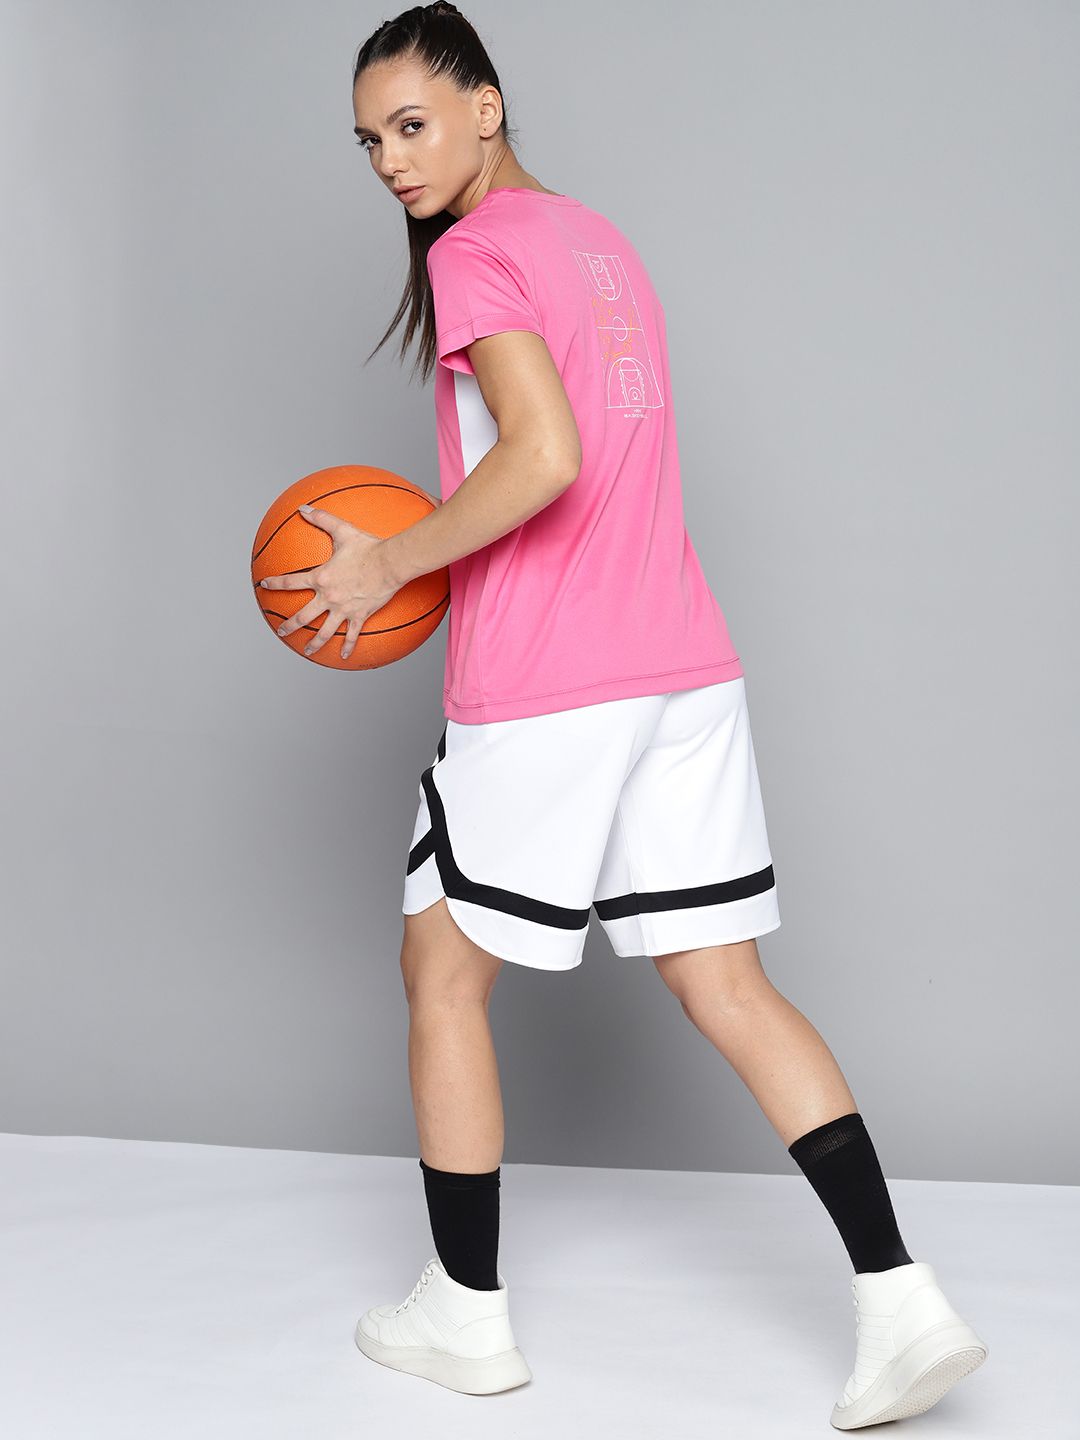 HRX By Hrithik Roshan Basketball Women Phiox Pink Rapid-Dry Typography Tshirts Price in India